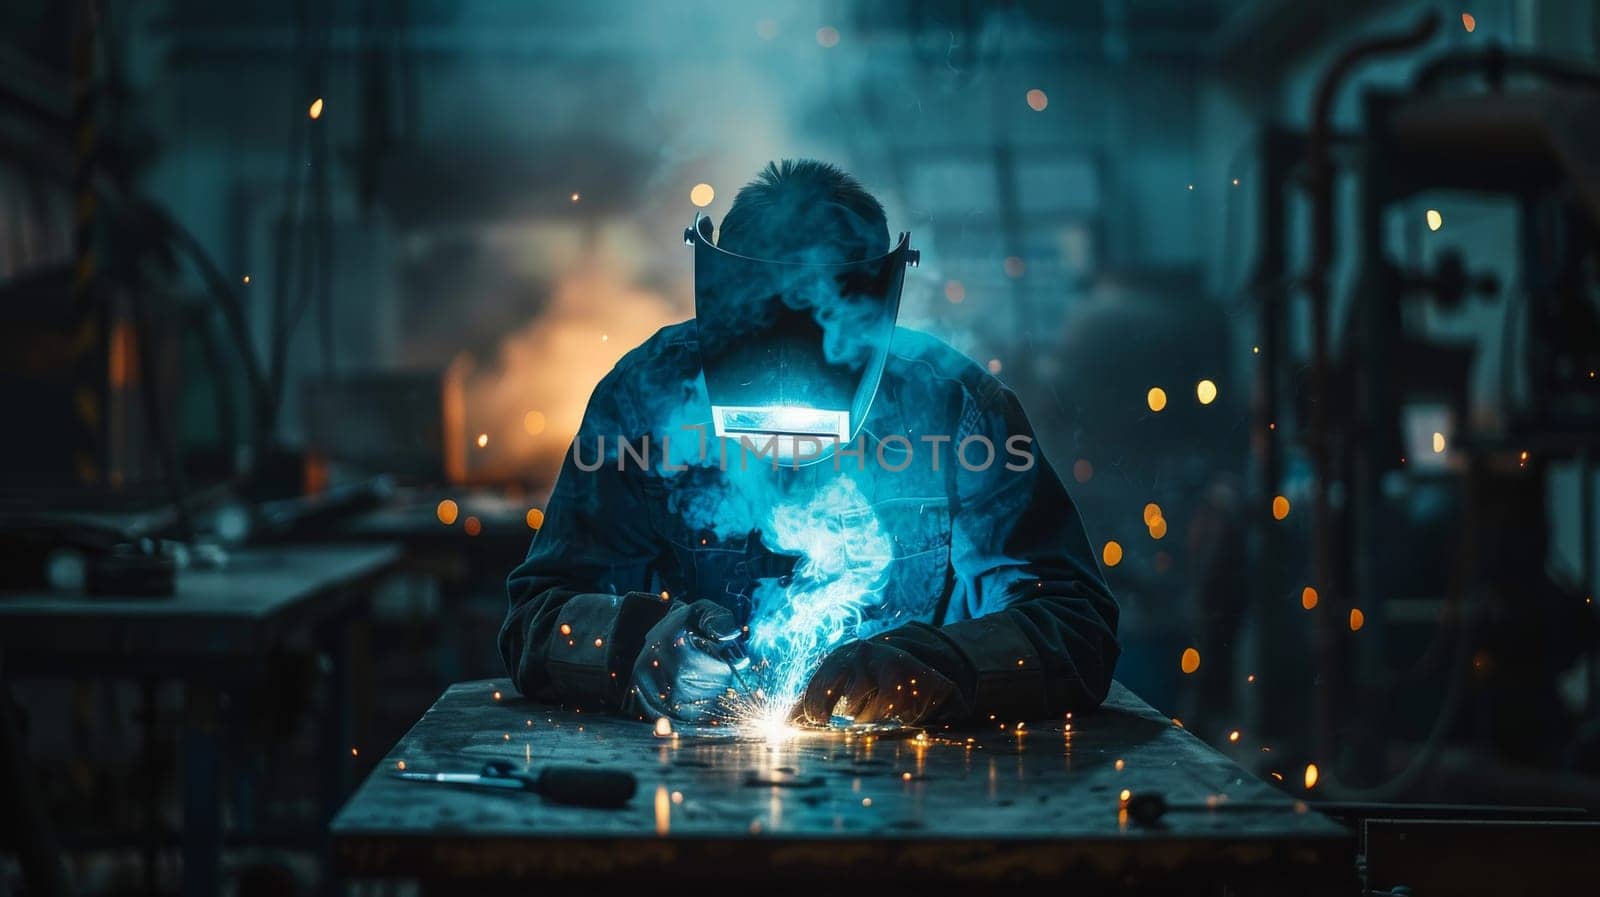 A man welder worker in a black jacket is working on a piece of metal. The image has a mood of industrial and hard work